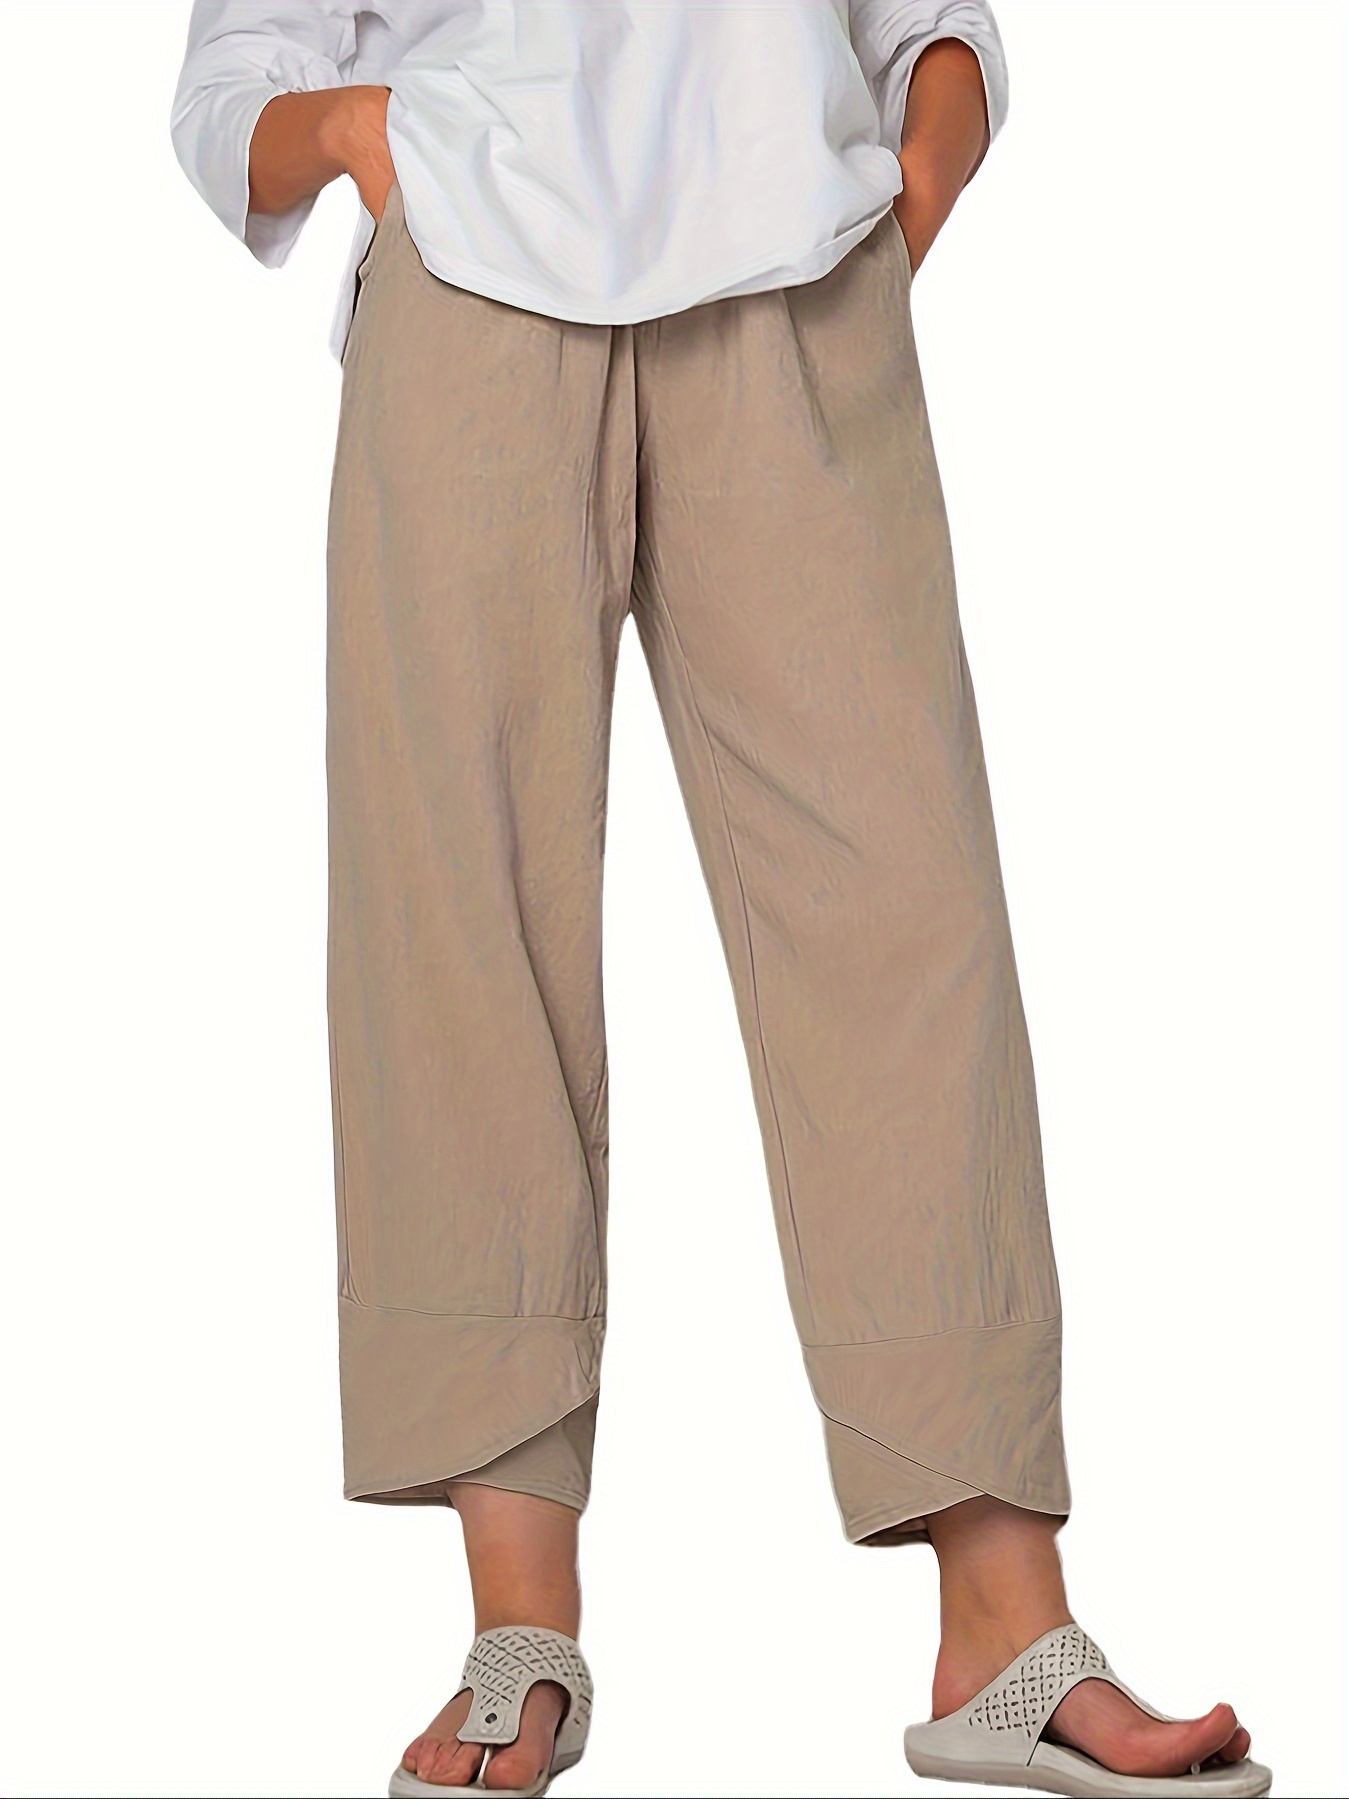 QLEICOM Womens Slacks Women's Relaxed Fit Straight Leg Pants Fashion Summer  Loose Cotton And Linen Pocket Solid Trousers Pants Work Cargo Casual Pants